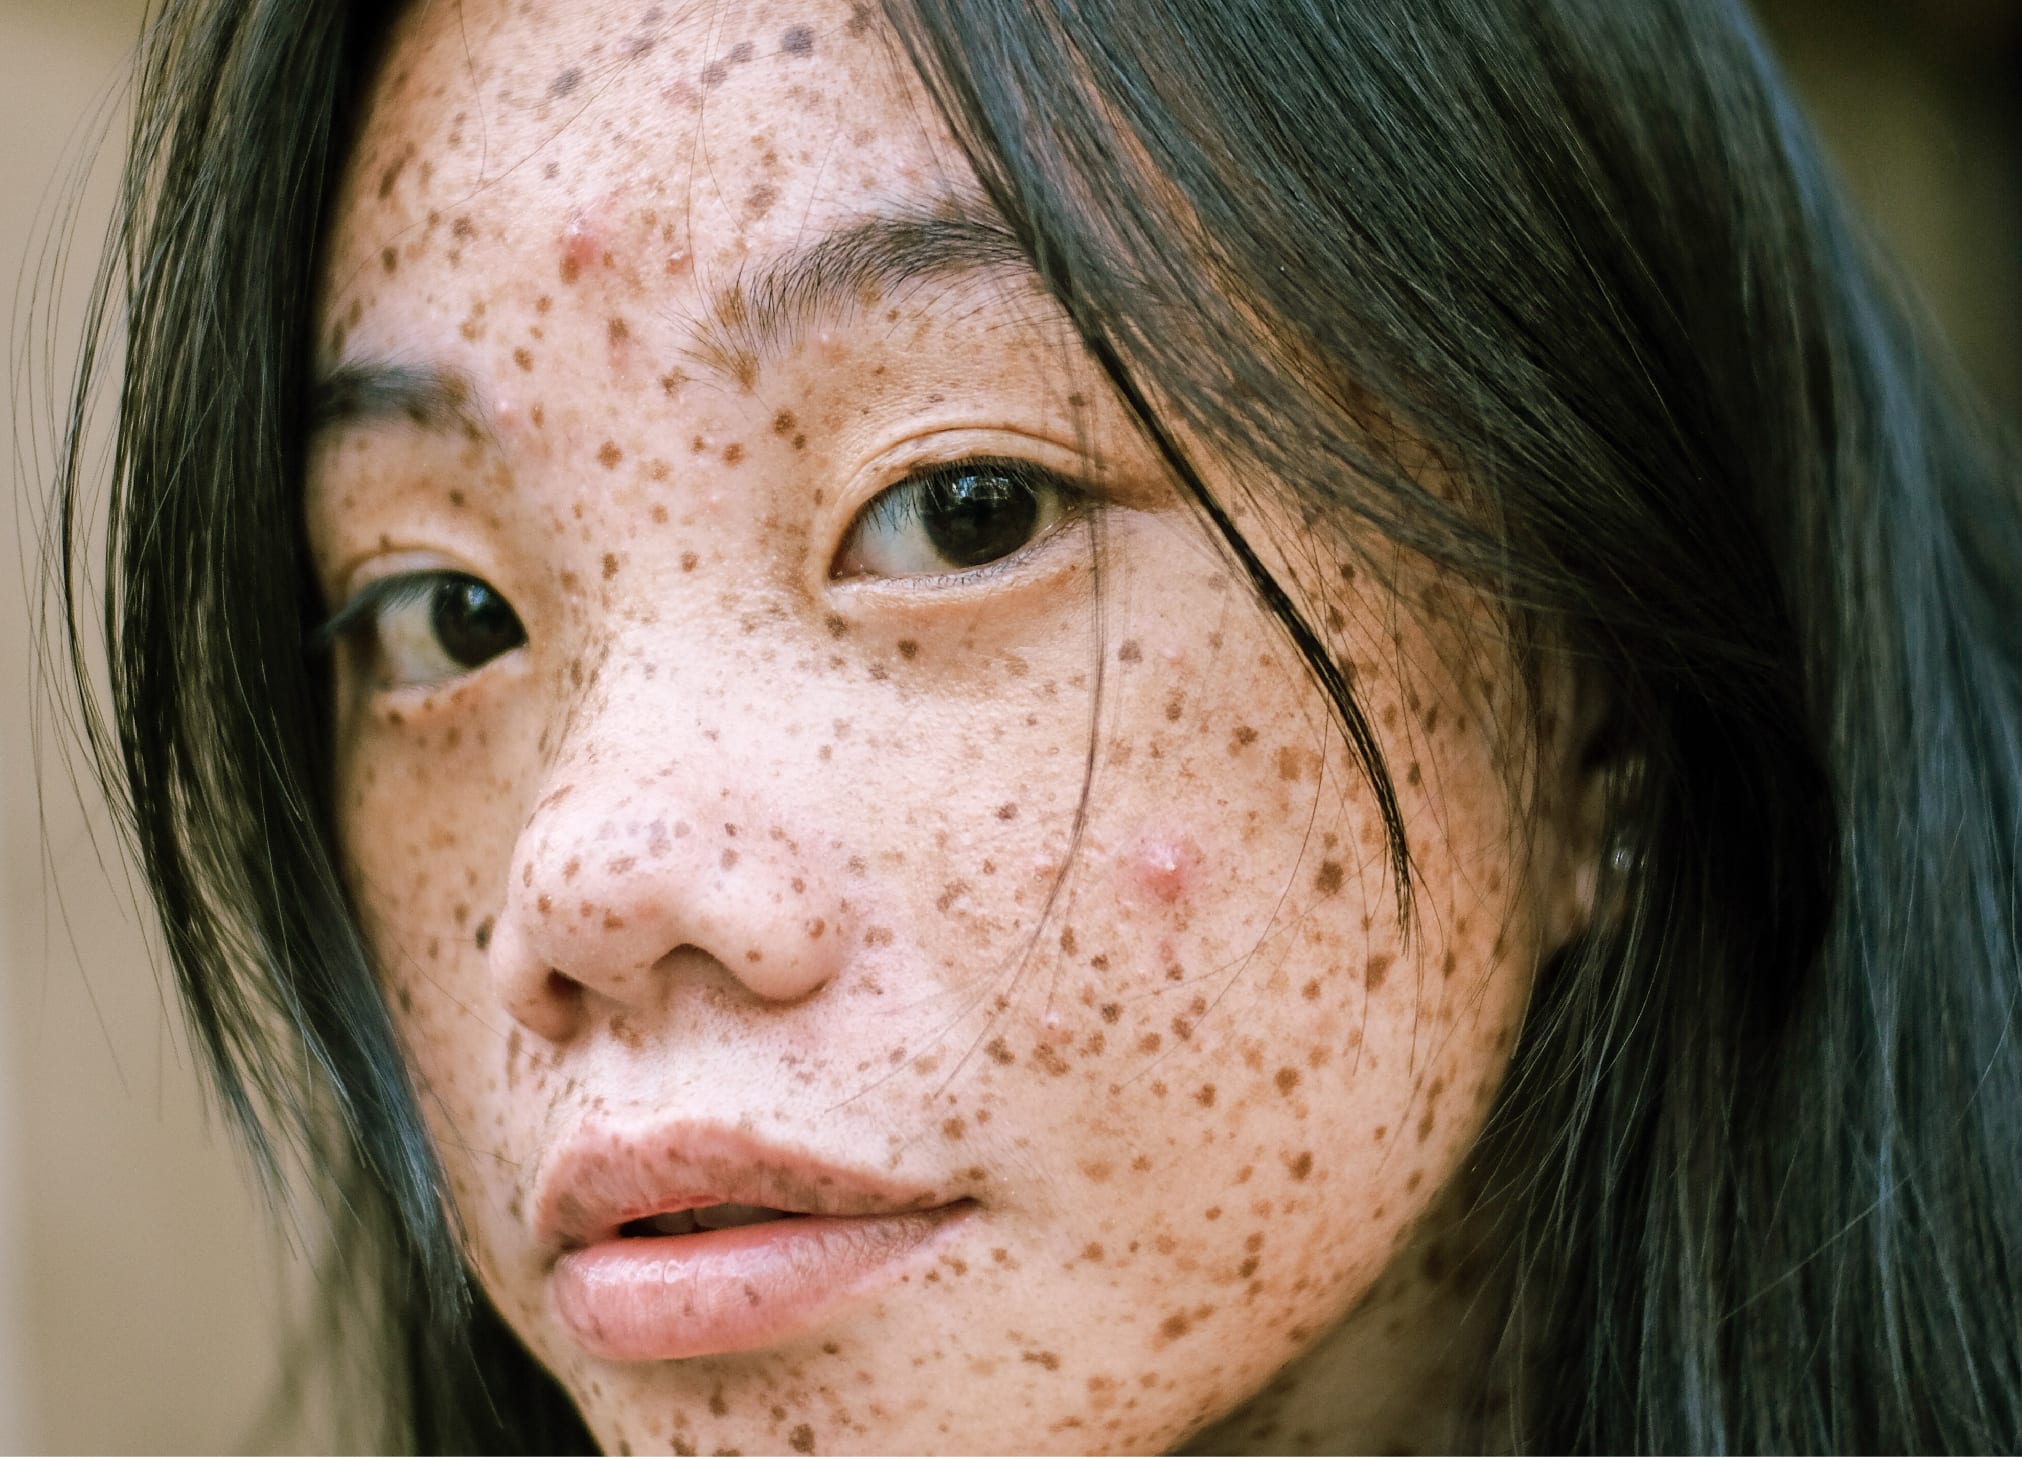 Period acne: Why you get it & what to do about it